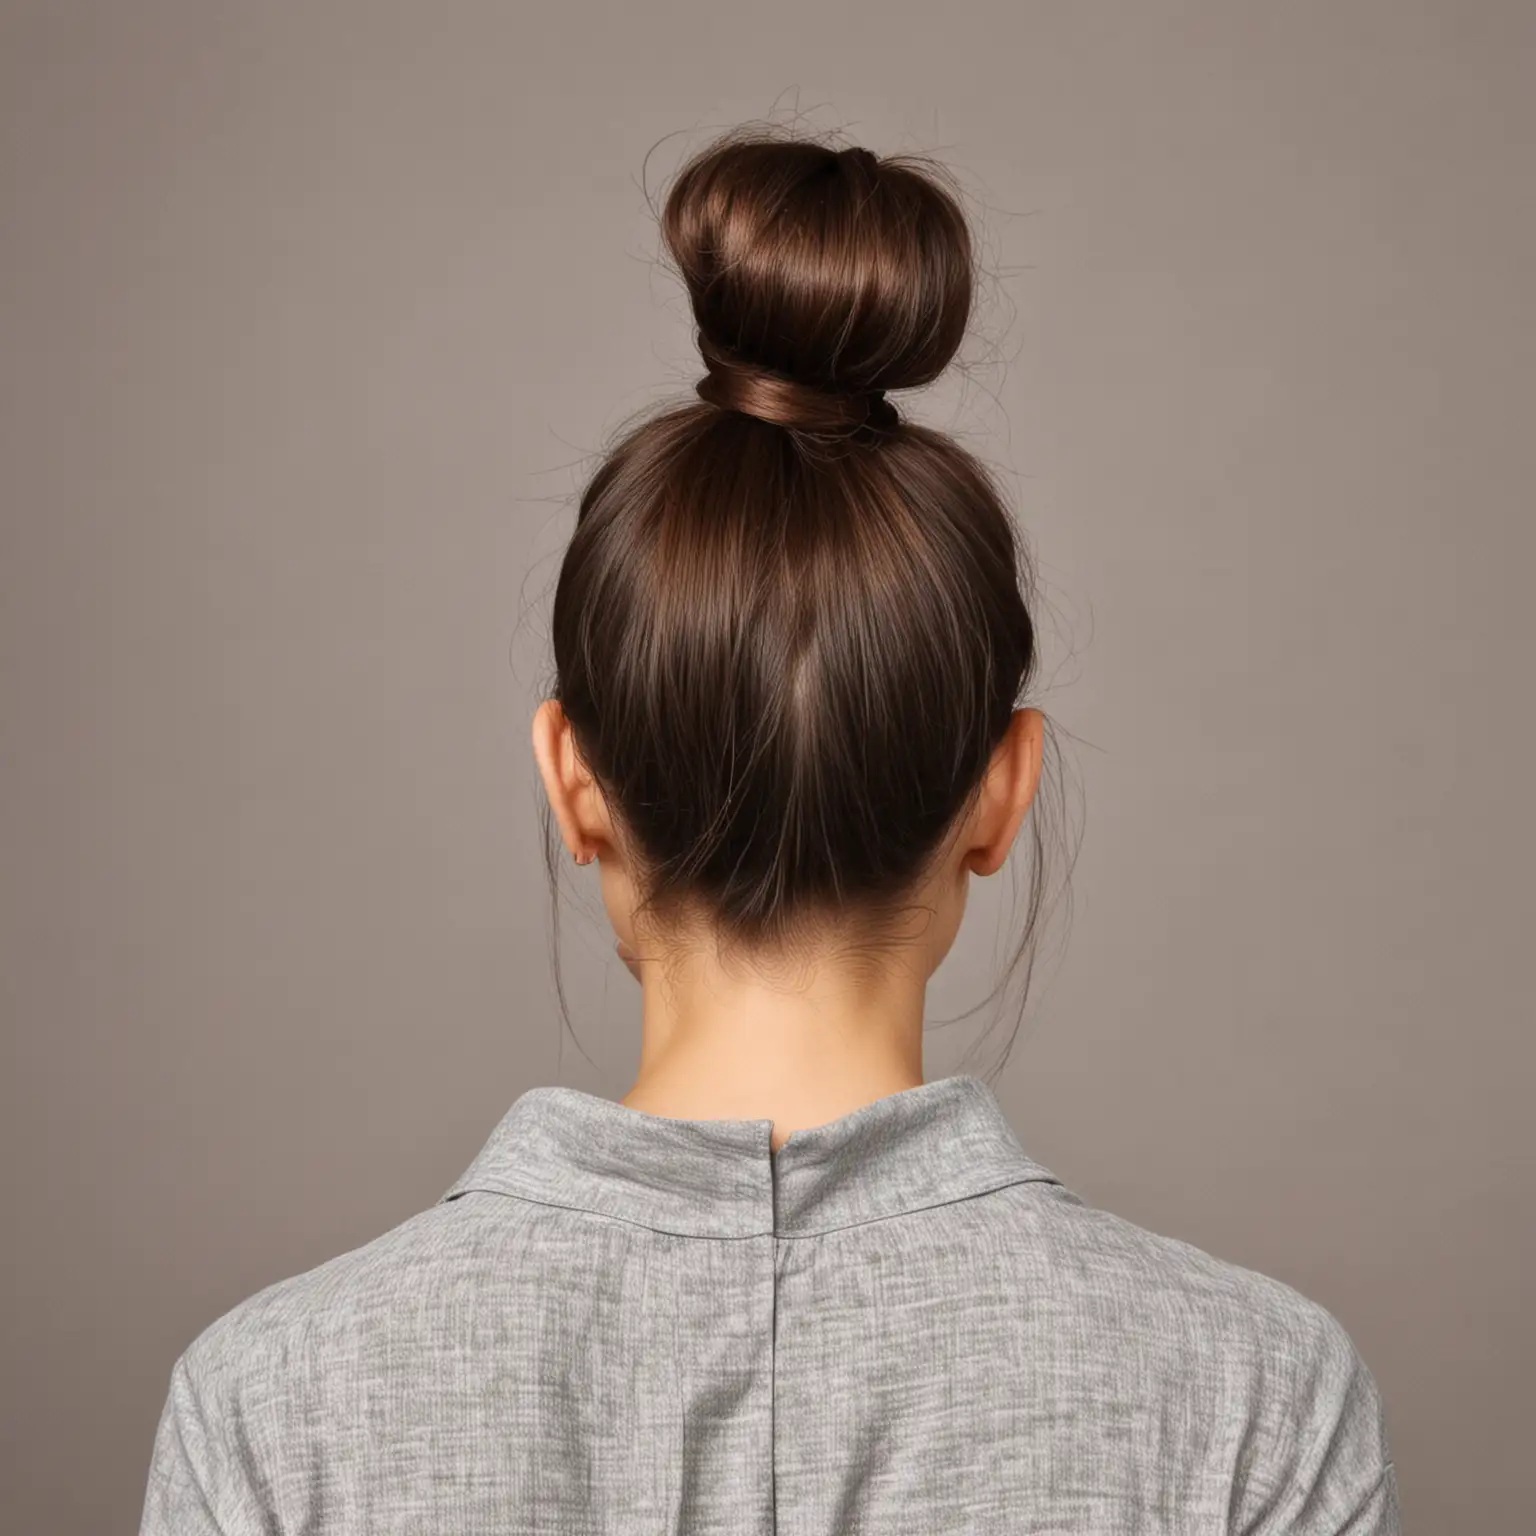 Elegant Woman with High Knot Hairstyle from Behind